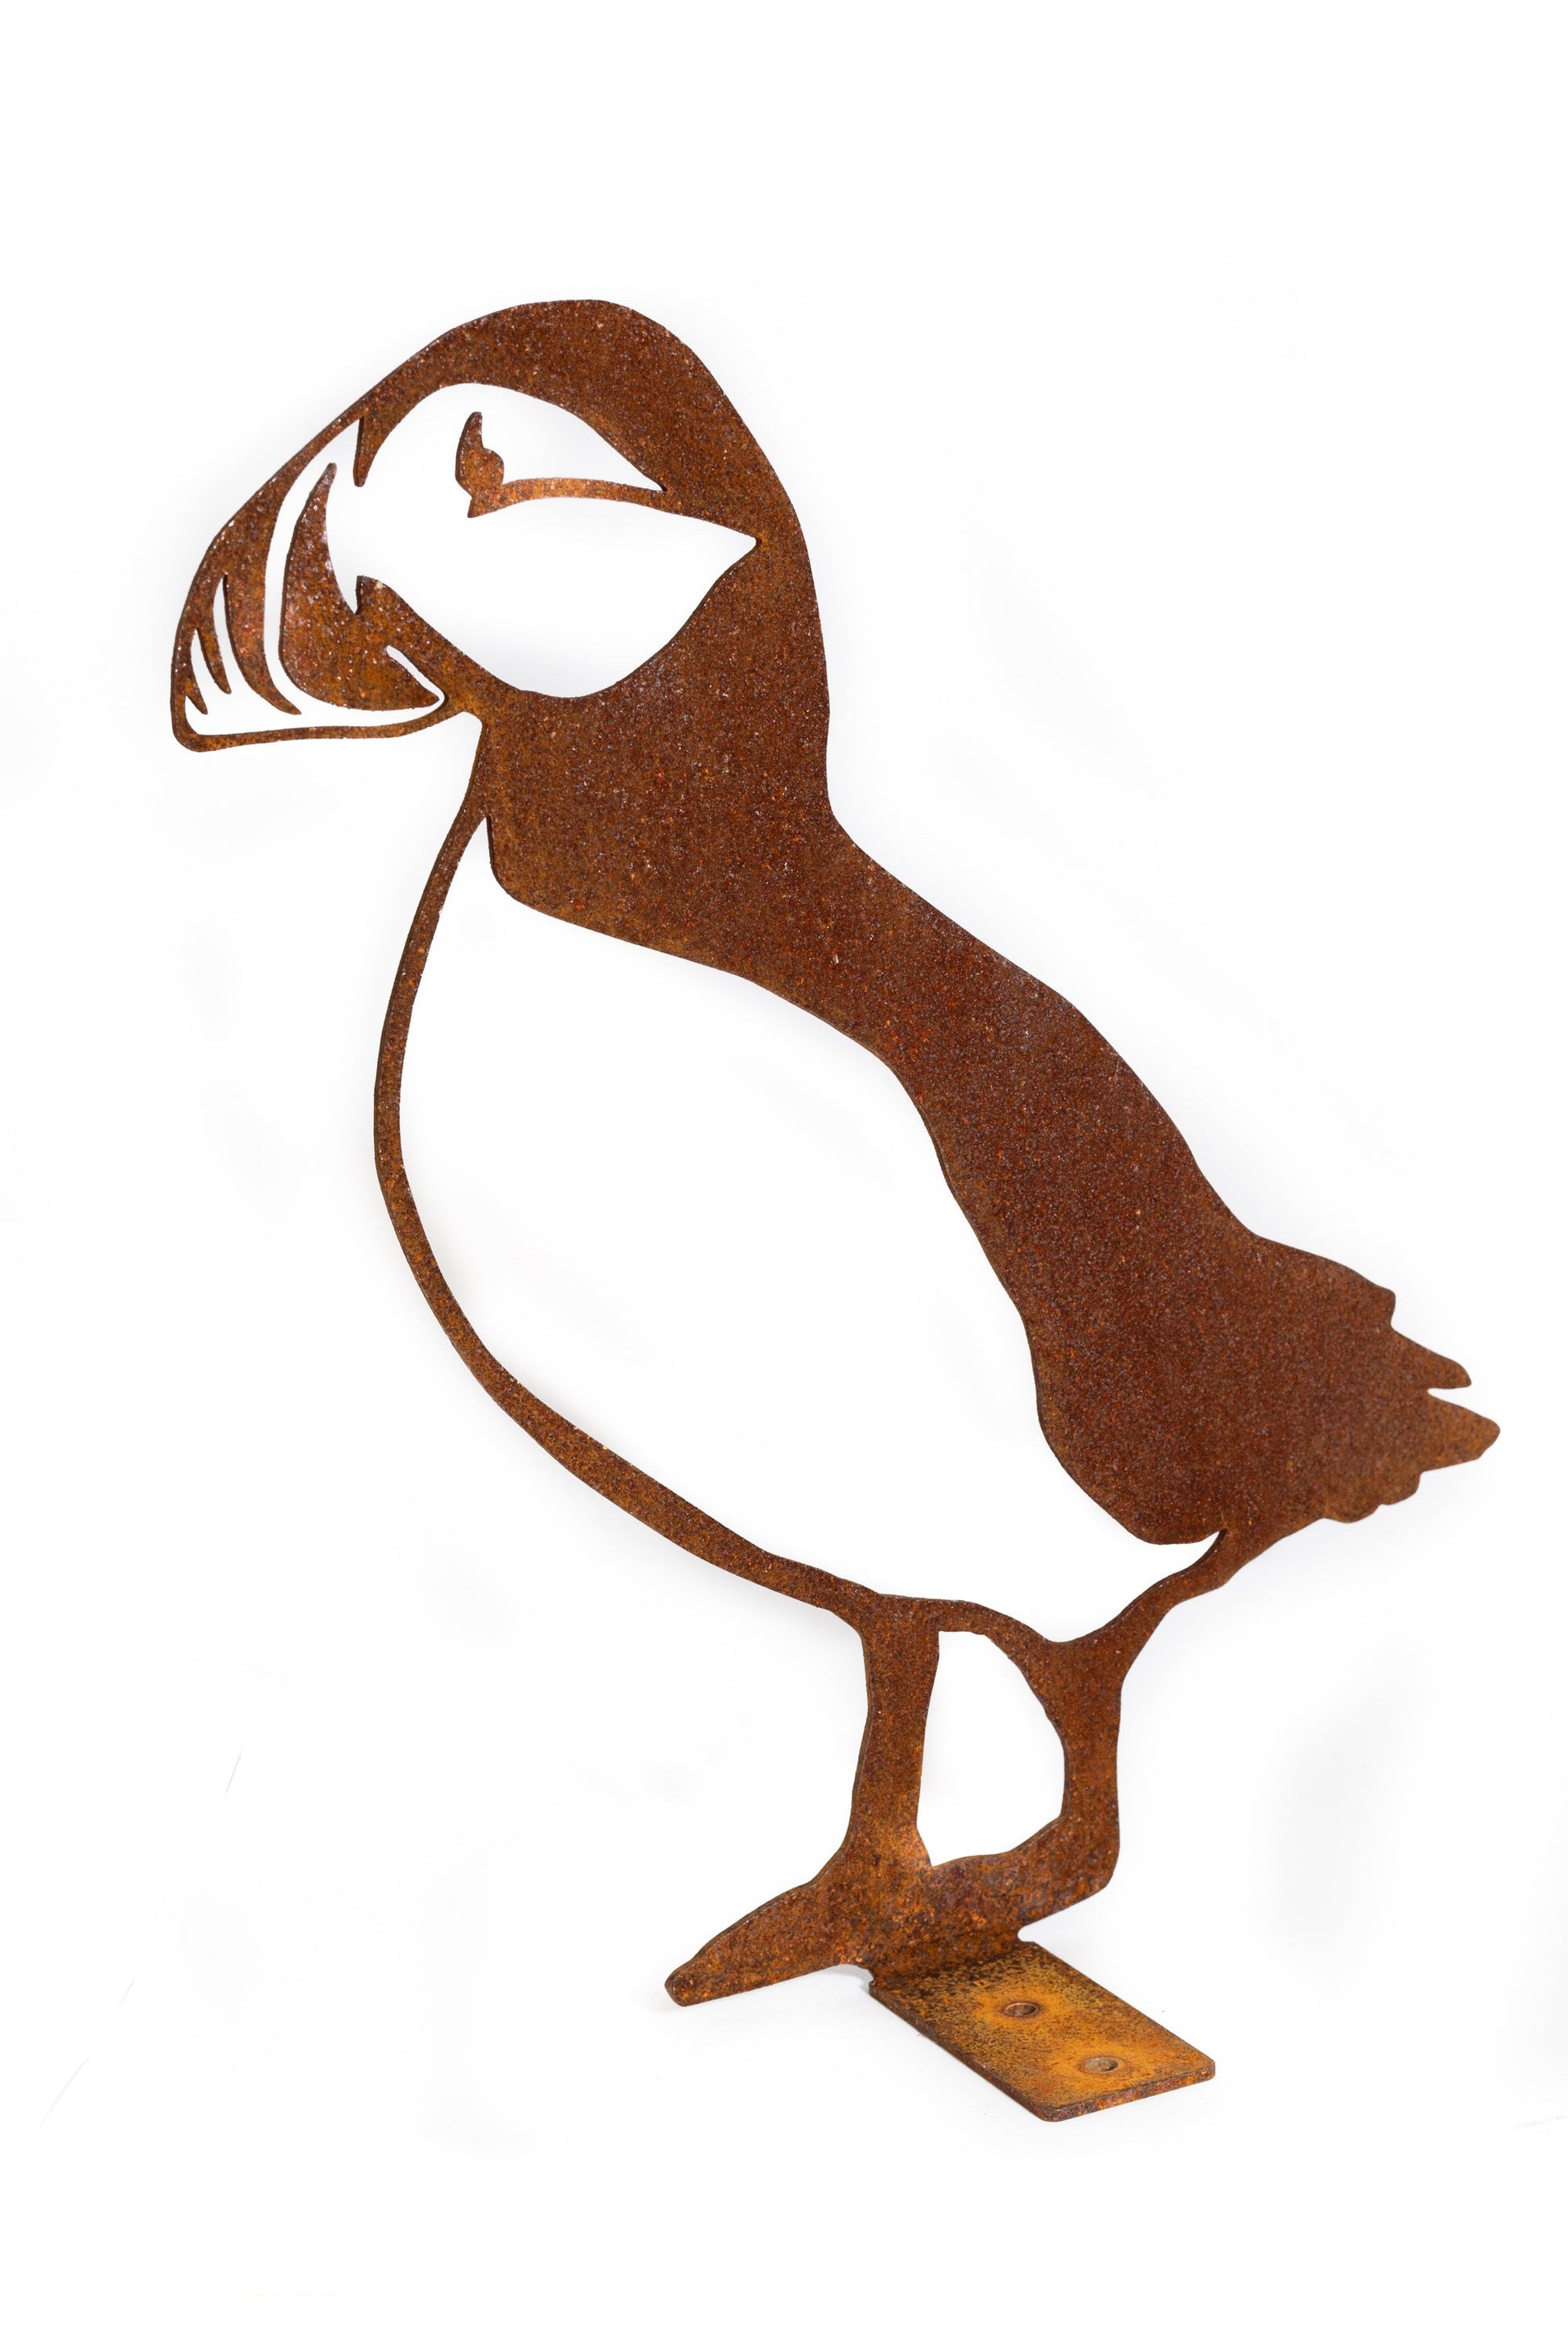 Puffin Fence Topper MetalMotif